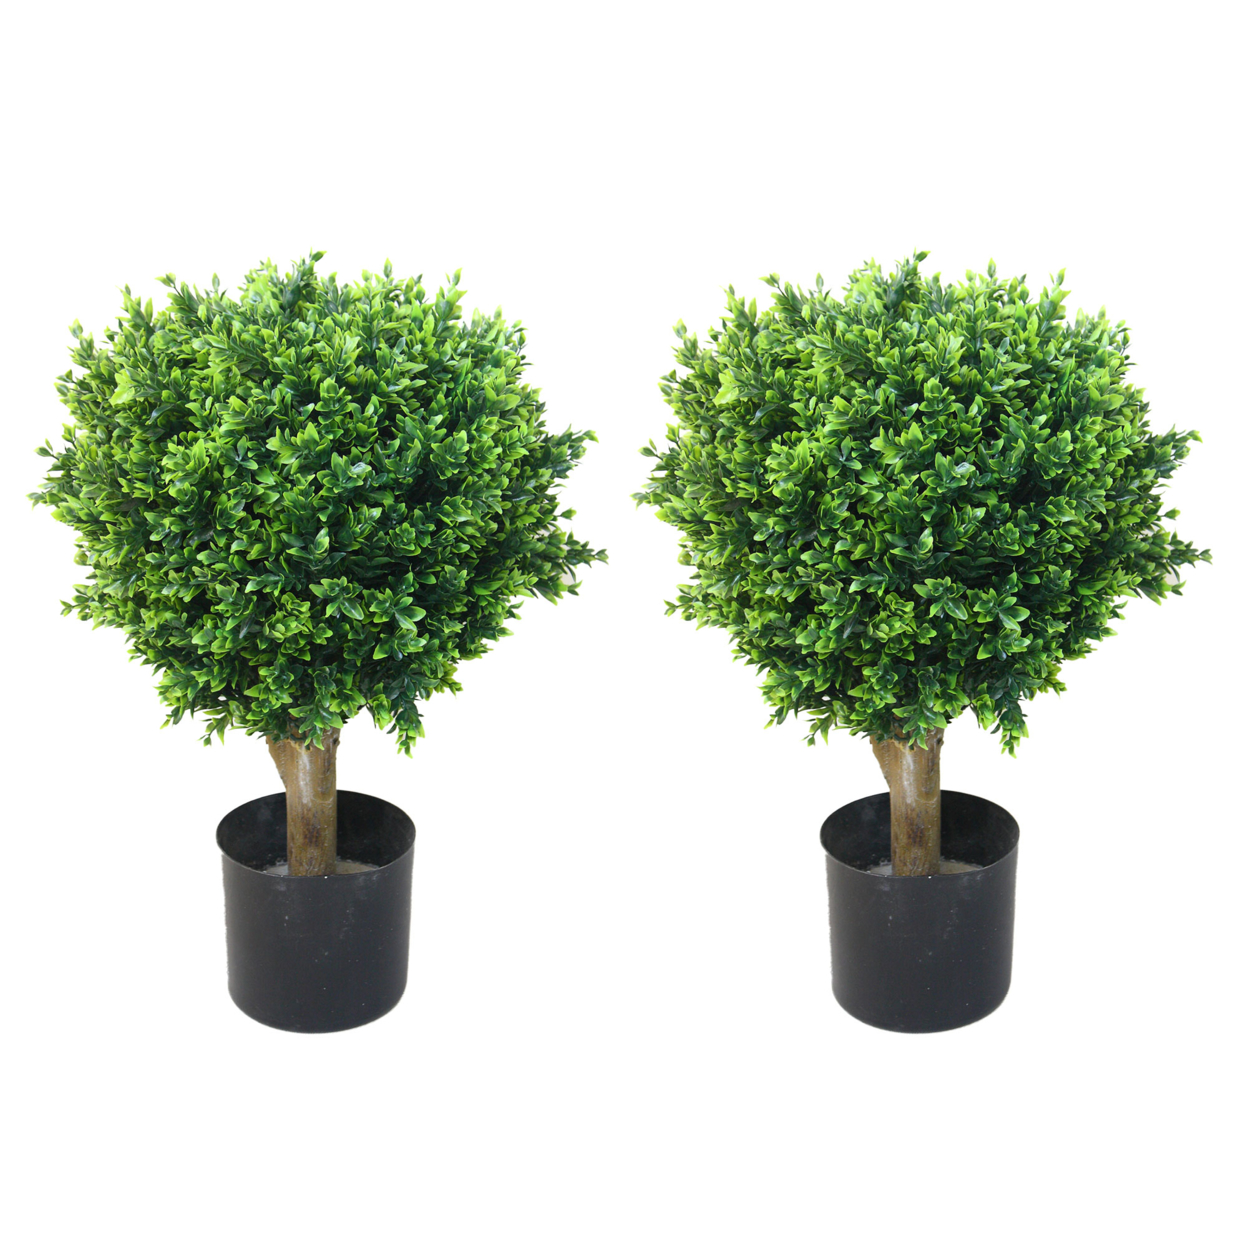 Artificial Hedyotis Tree Plants Fake Topiary Indoor Outdoor 24 Inches Tall Set Of 2